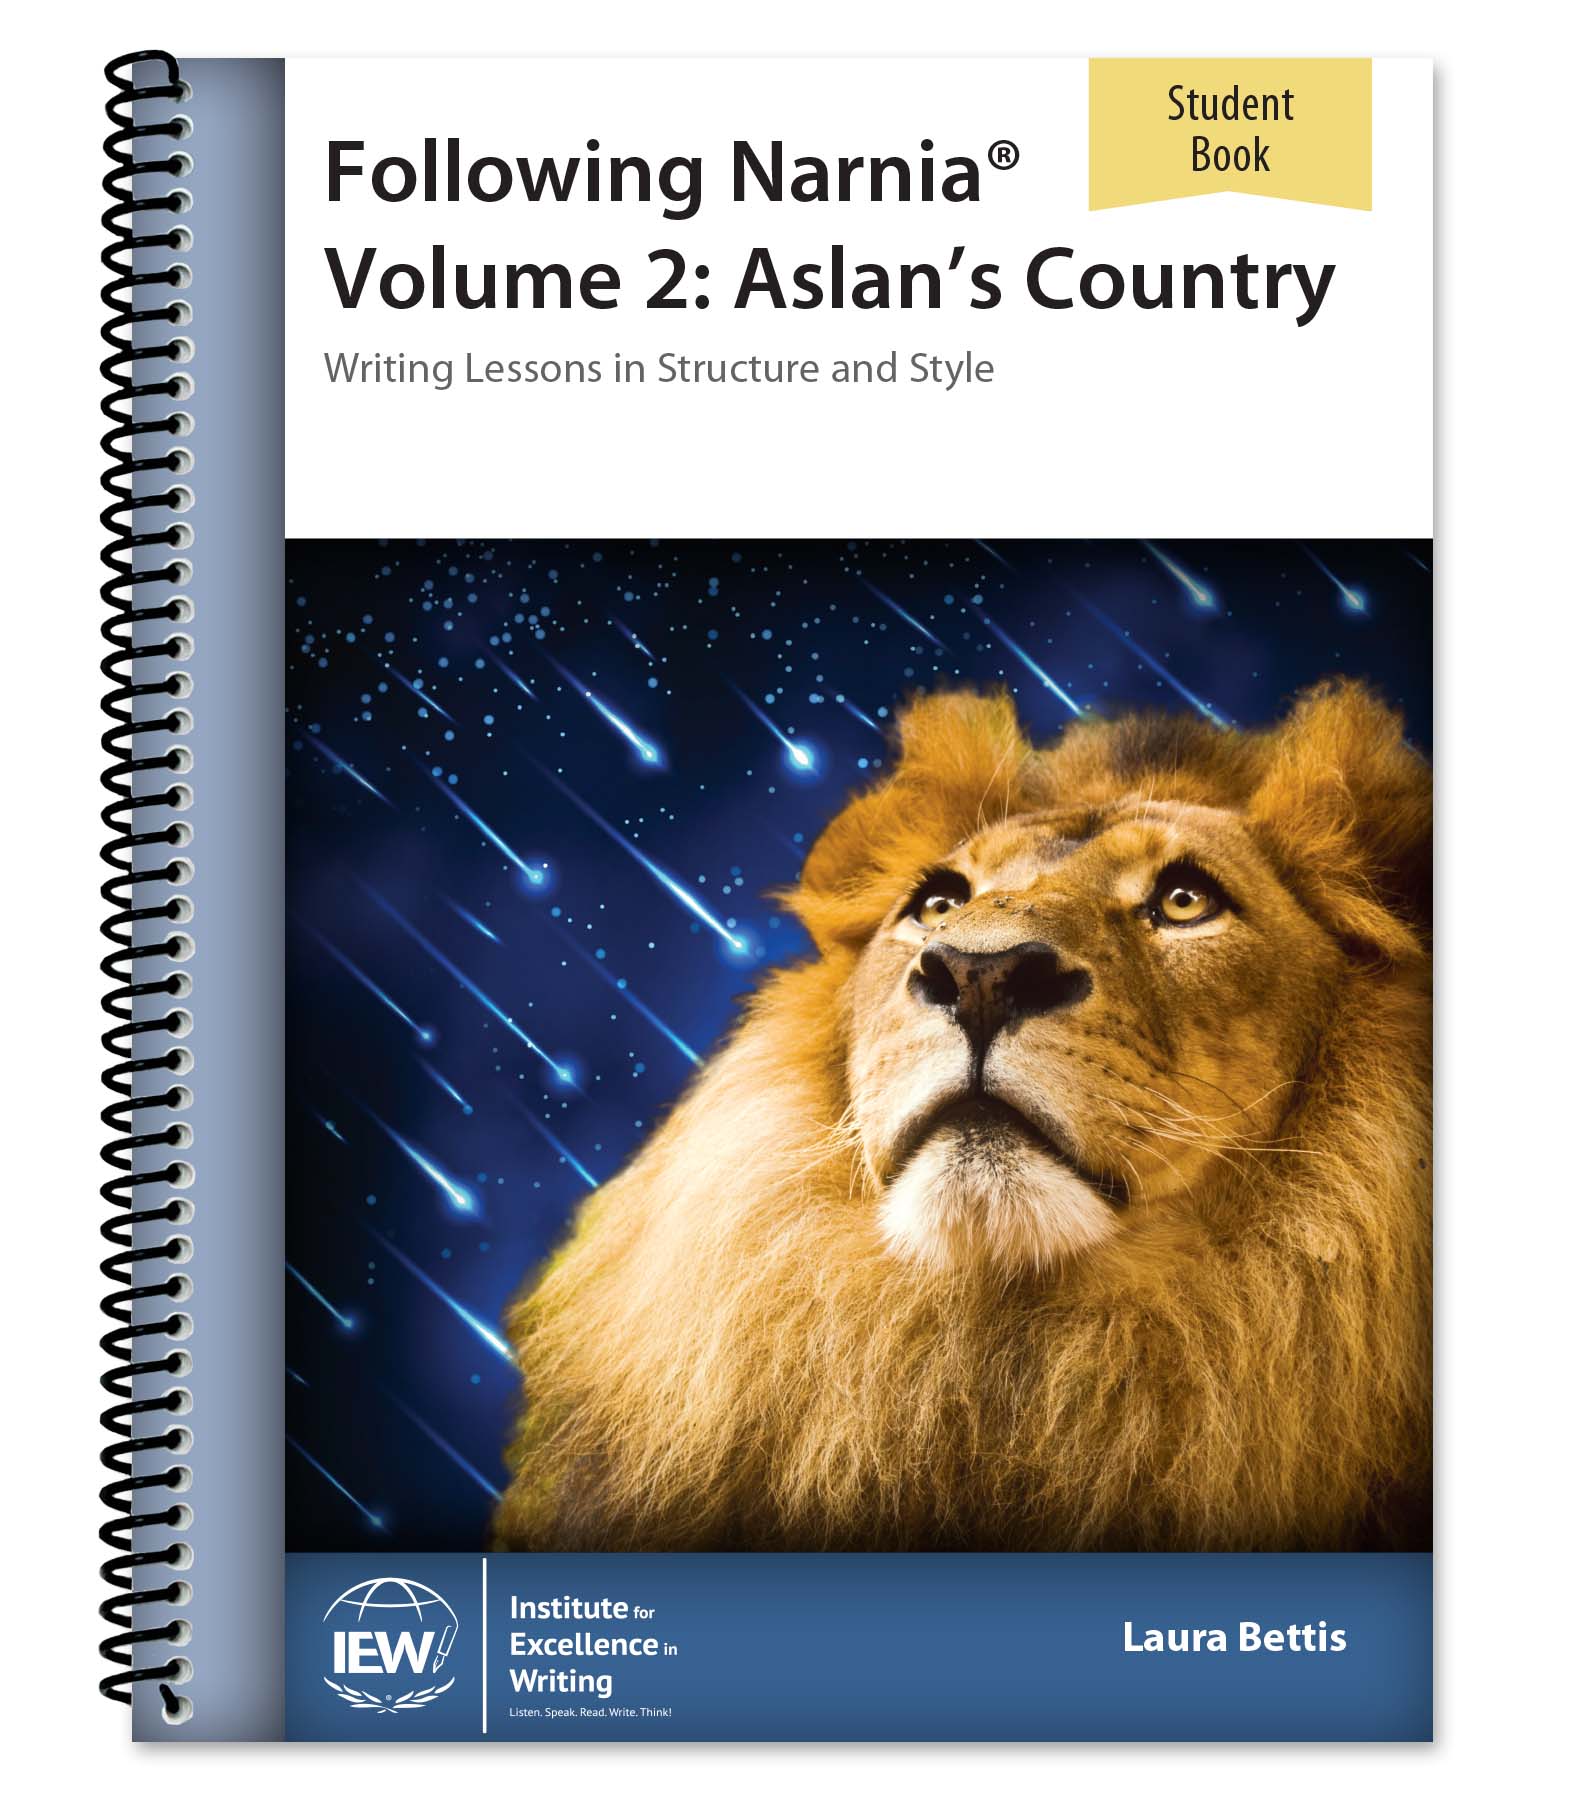 Following Narnia® Volume 2: Aslan's Country [Student Book only]